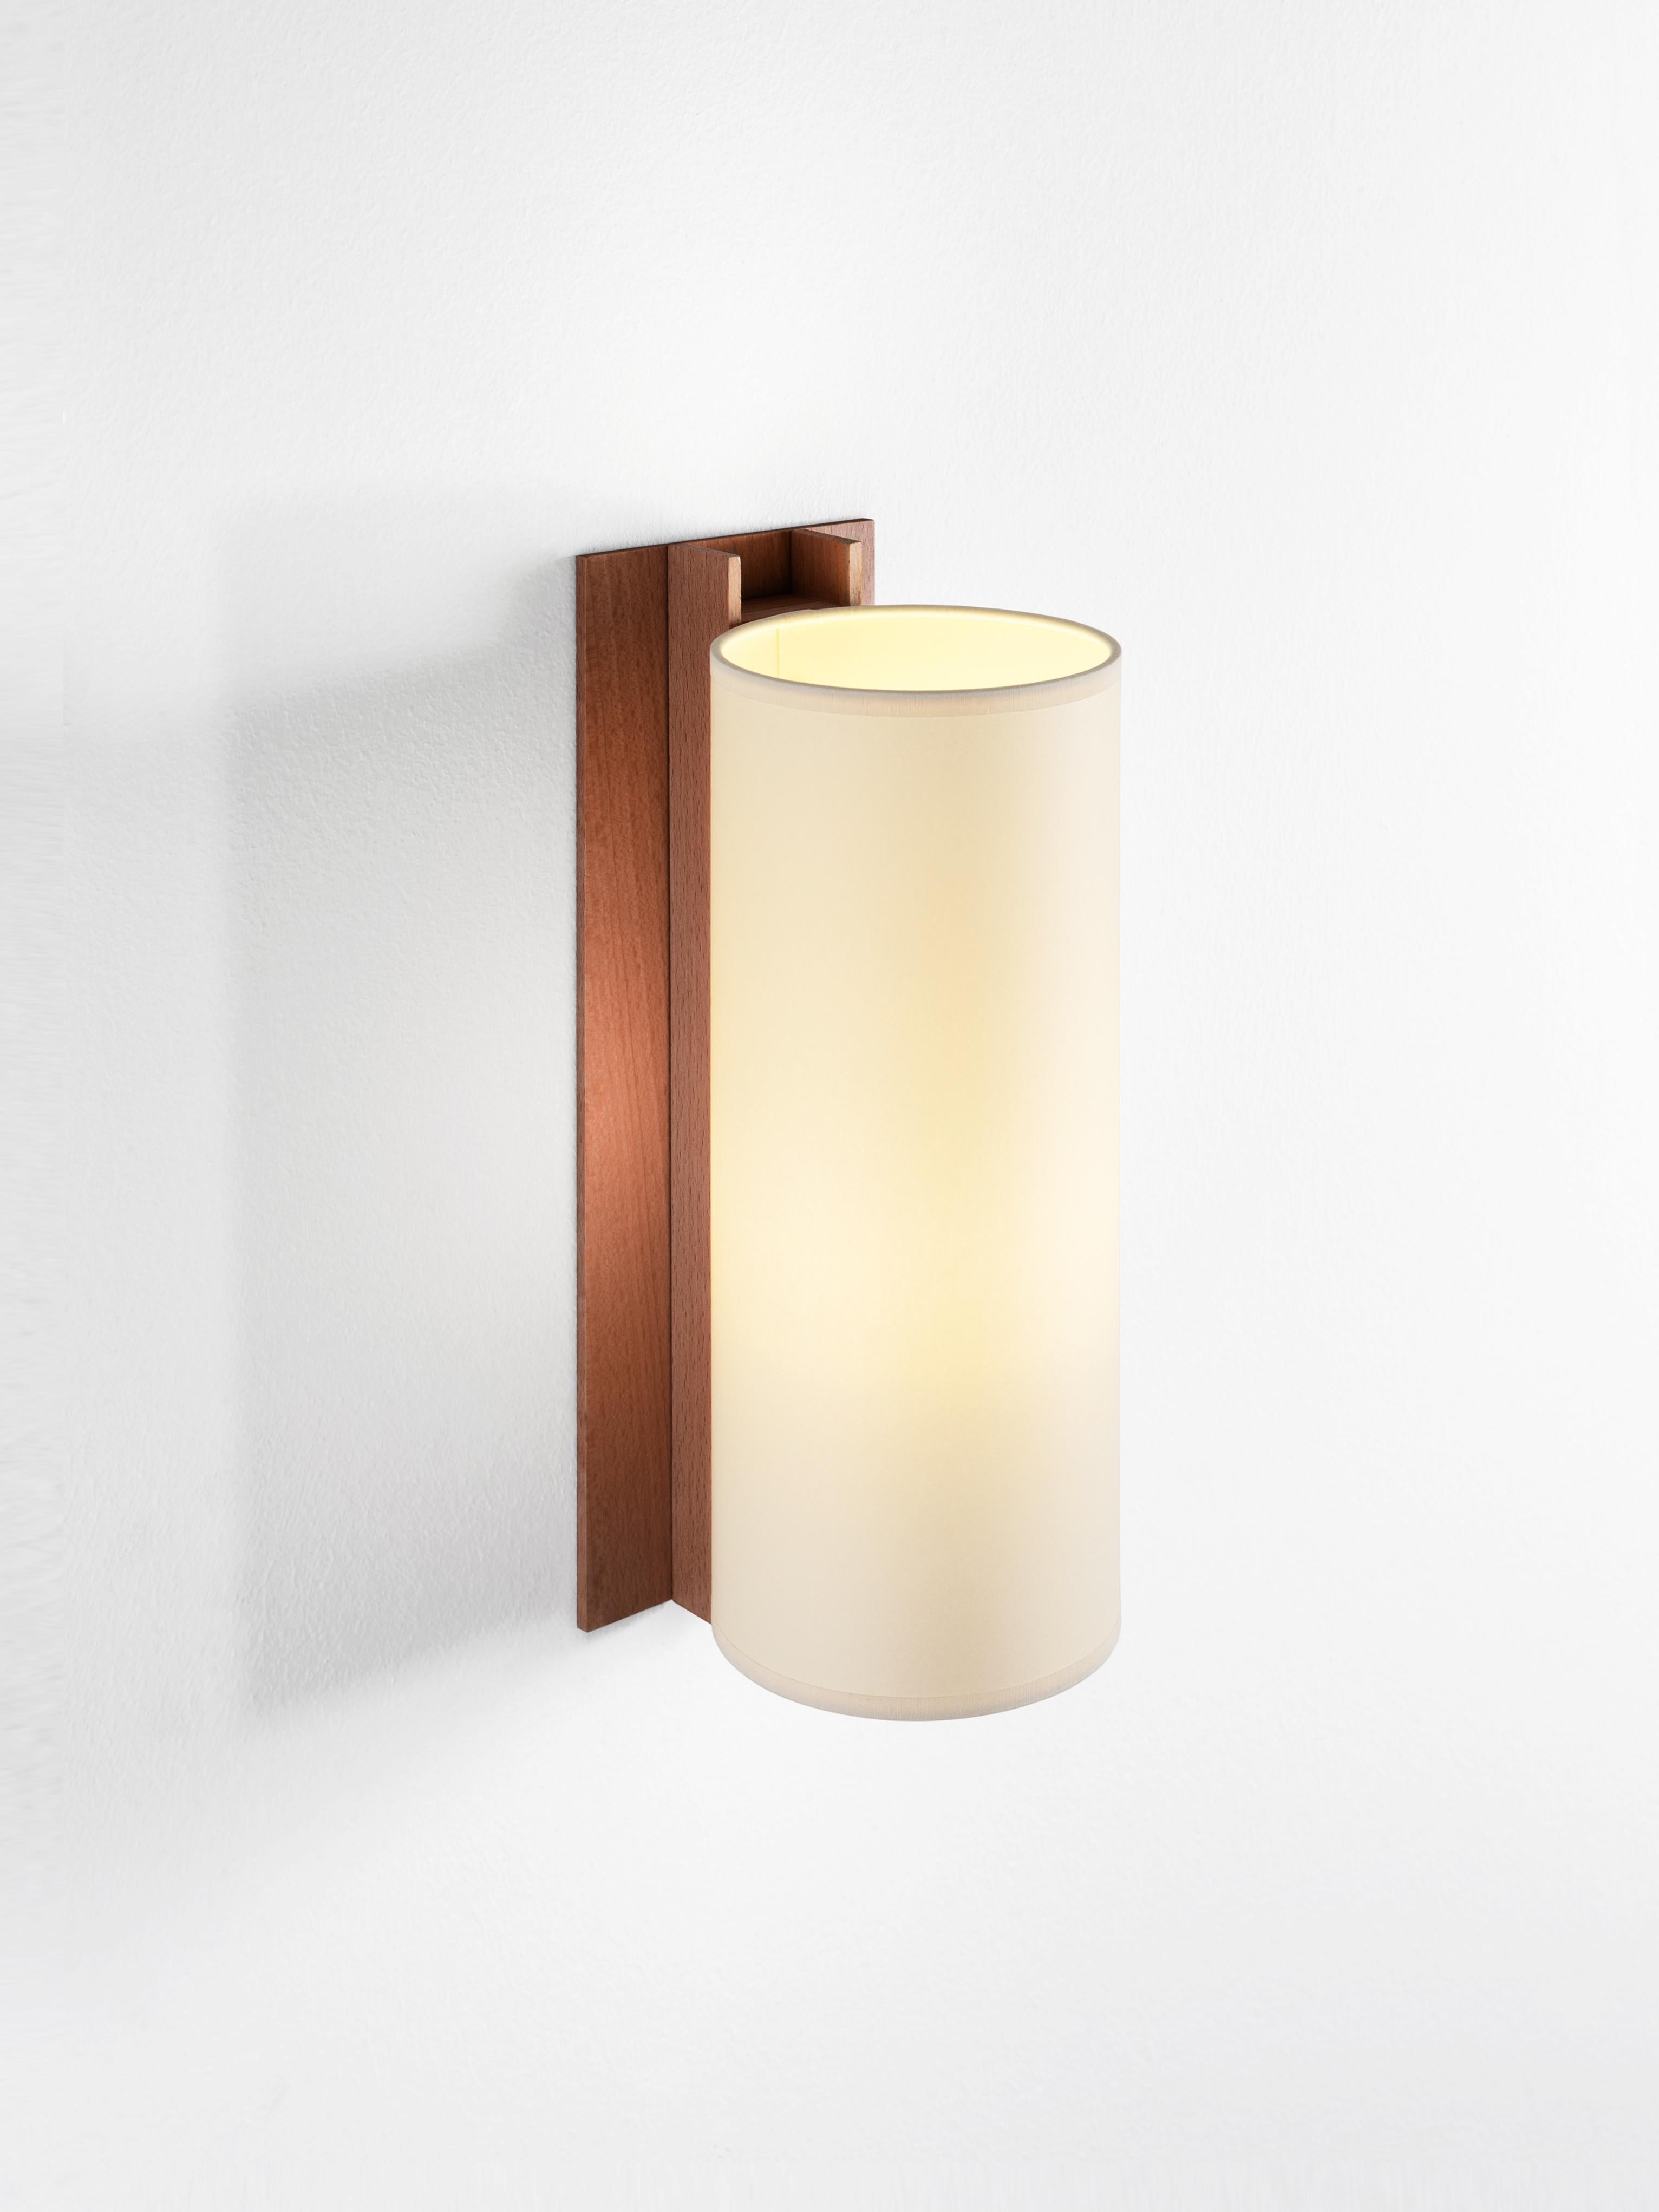 Beige and Walnut TMM Largo wall lamp by Miguel Milá.
Dimensions: D 12 x W 15 x H 34 cm.
Materials: Metal, walnut wood, parchment lampshade.
Available in beech or walnut and in white or beige lampshade.

The long and short wall lamps belonging